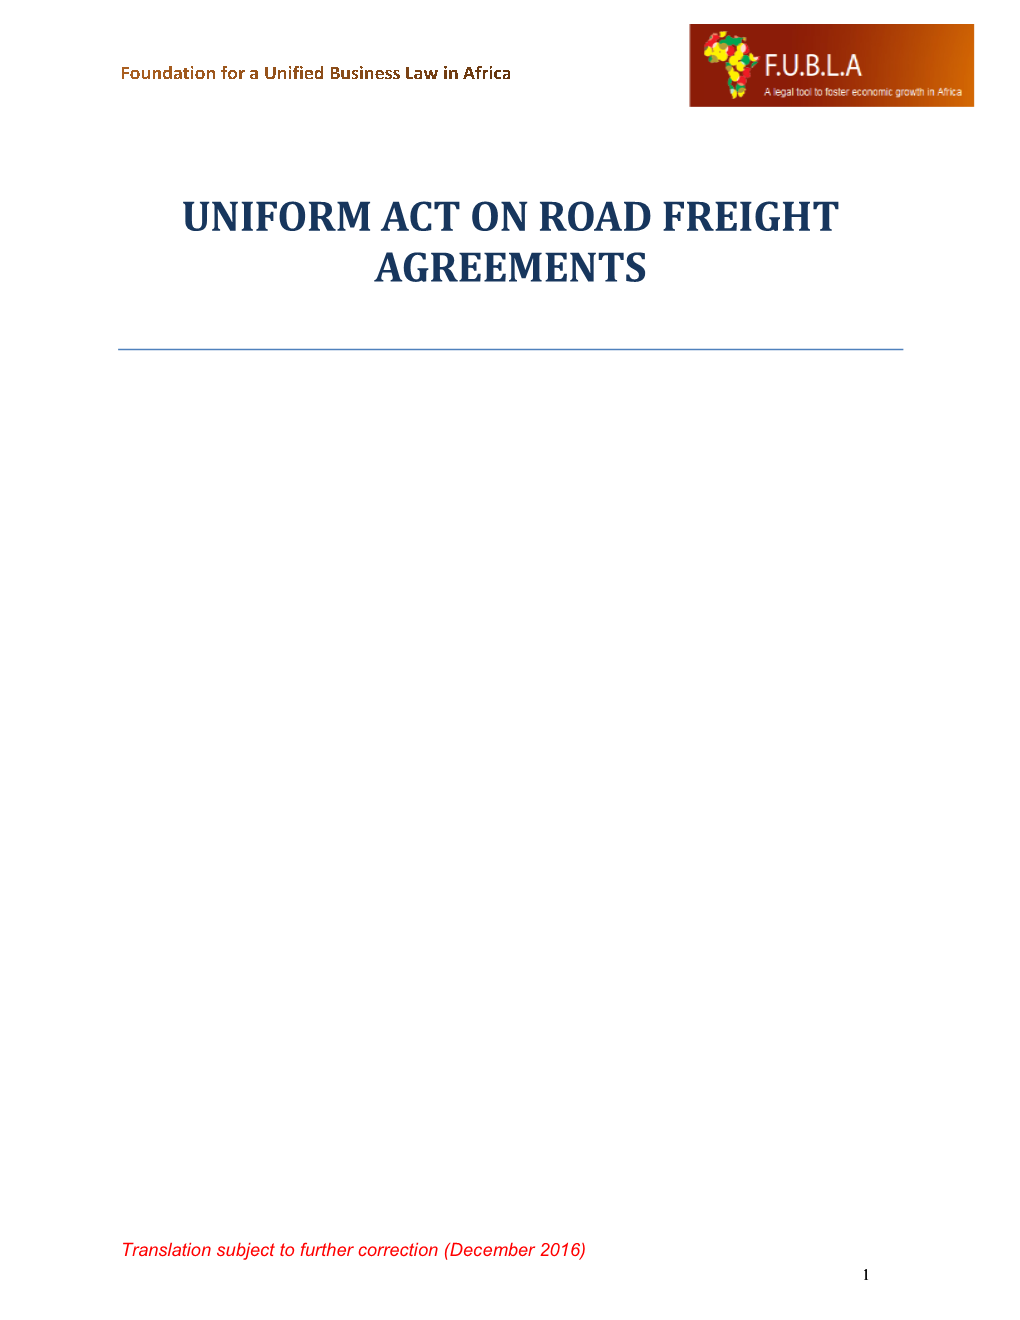 Uniform Act on Road Freight Agreements